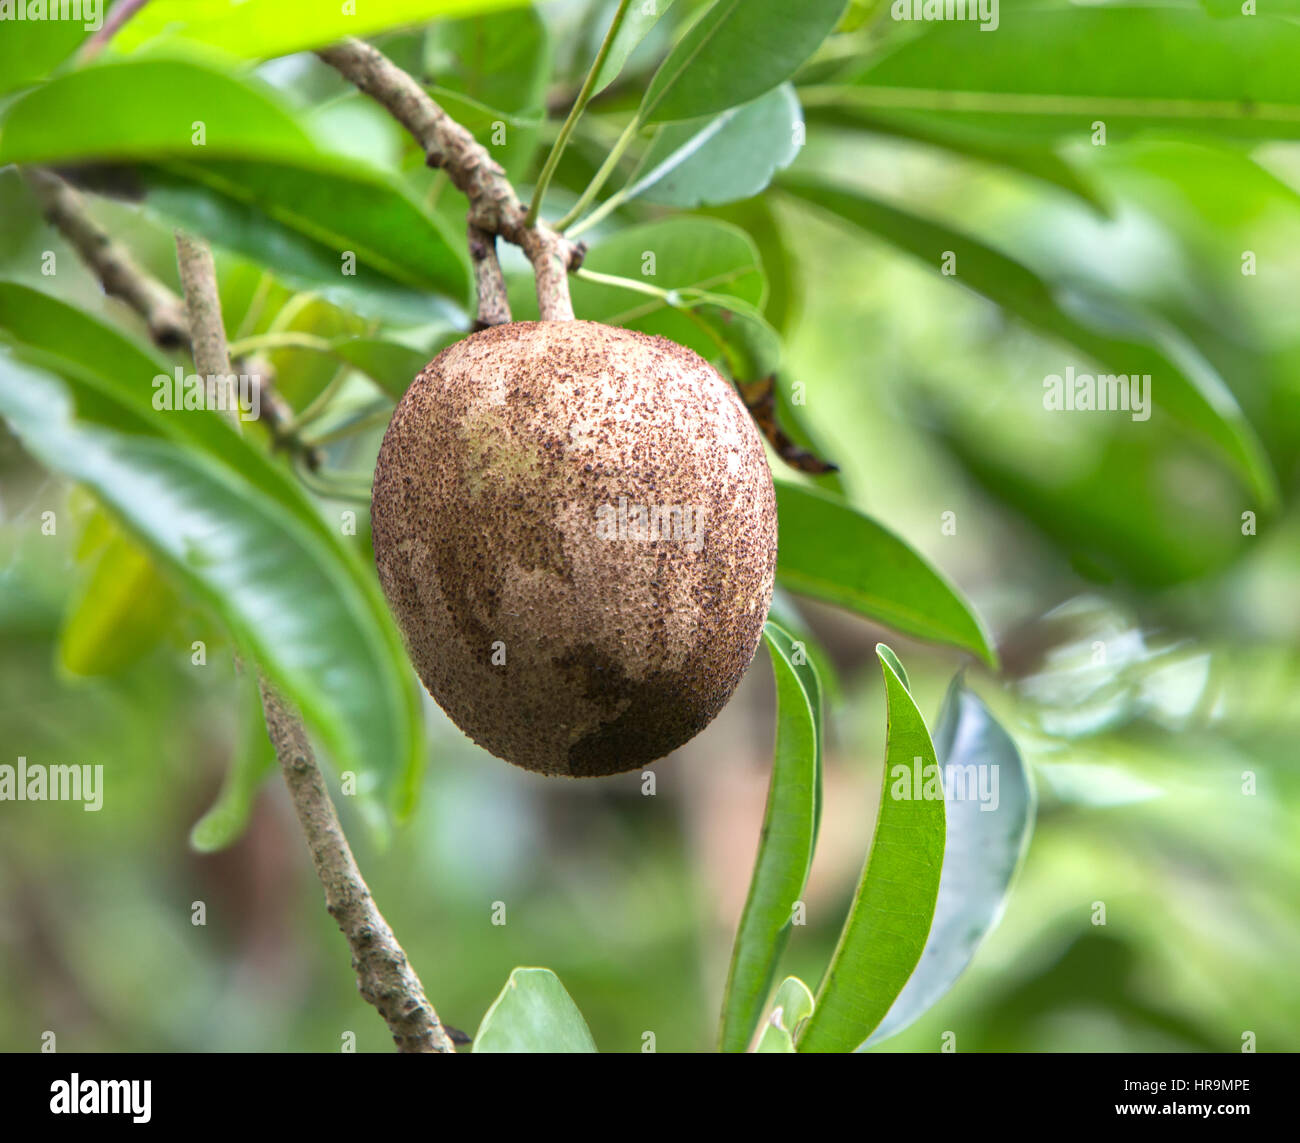 Sapodilla fruit maturing on branch 'Manilkara zapota',  has folkloric beliefs for the use of several parts of the tree & fruit. Stock Photo